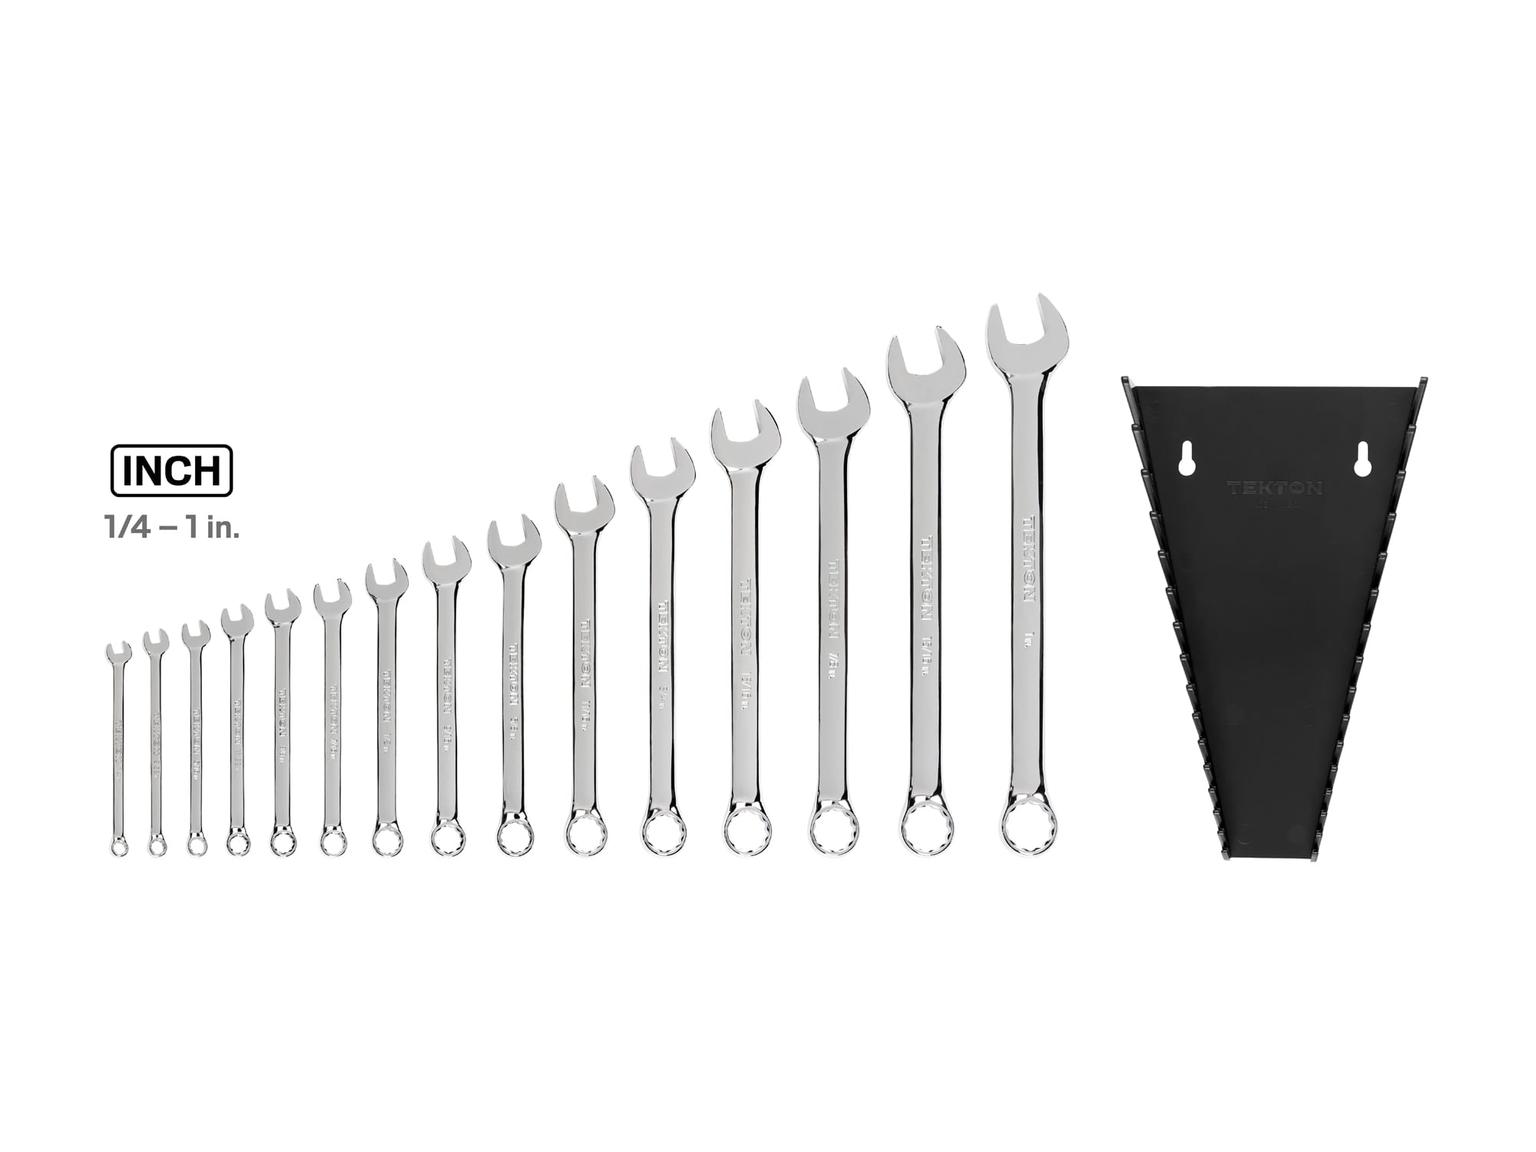 TEKTON WCB92106-T Combination Wrench Set with Rack, 15-Piece (1/4 - 1 in.)